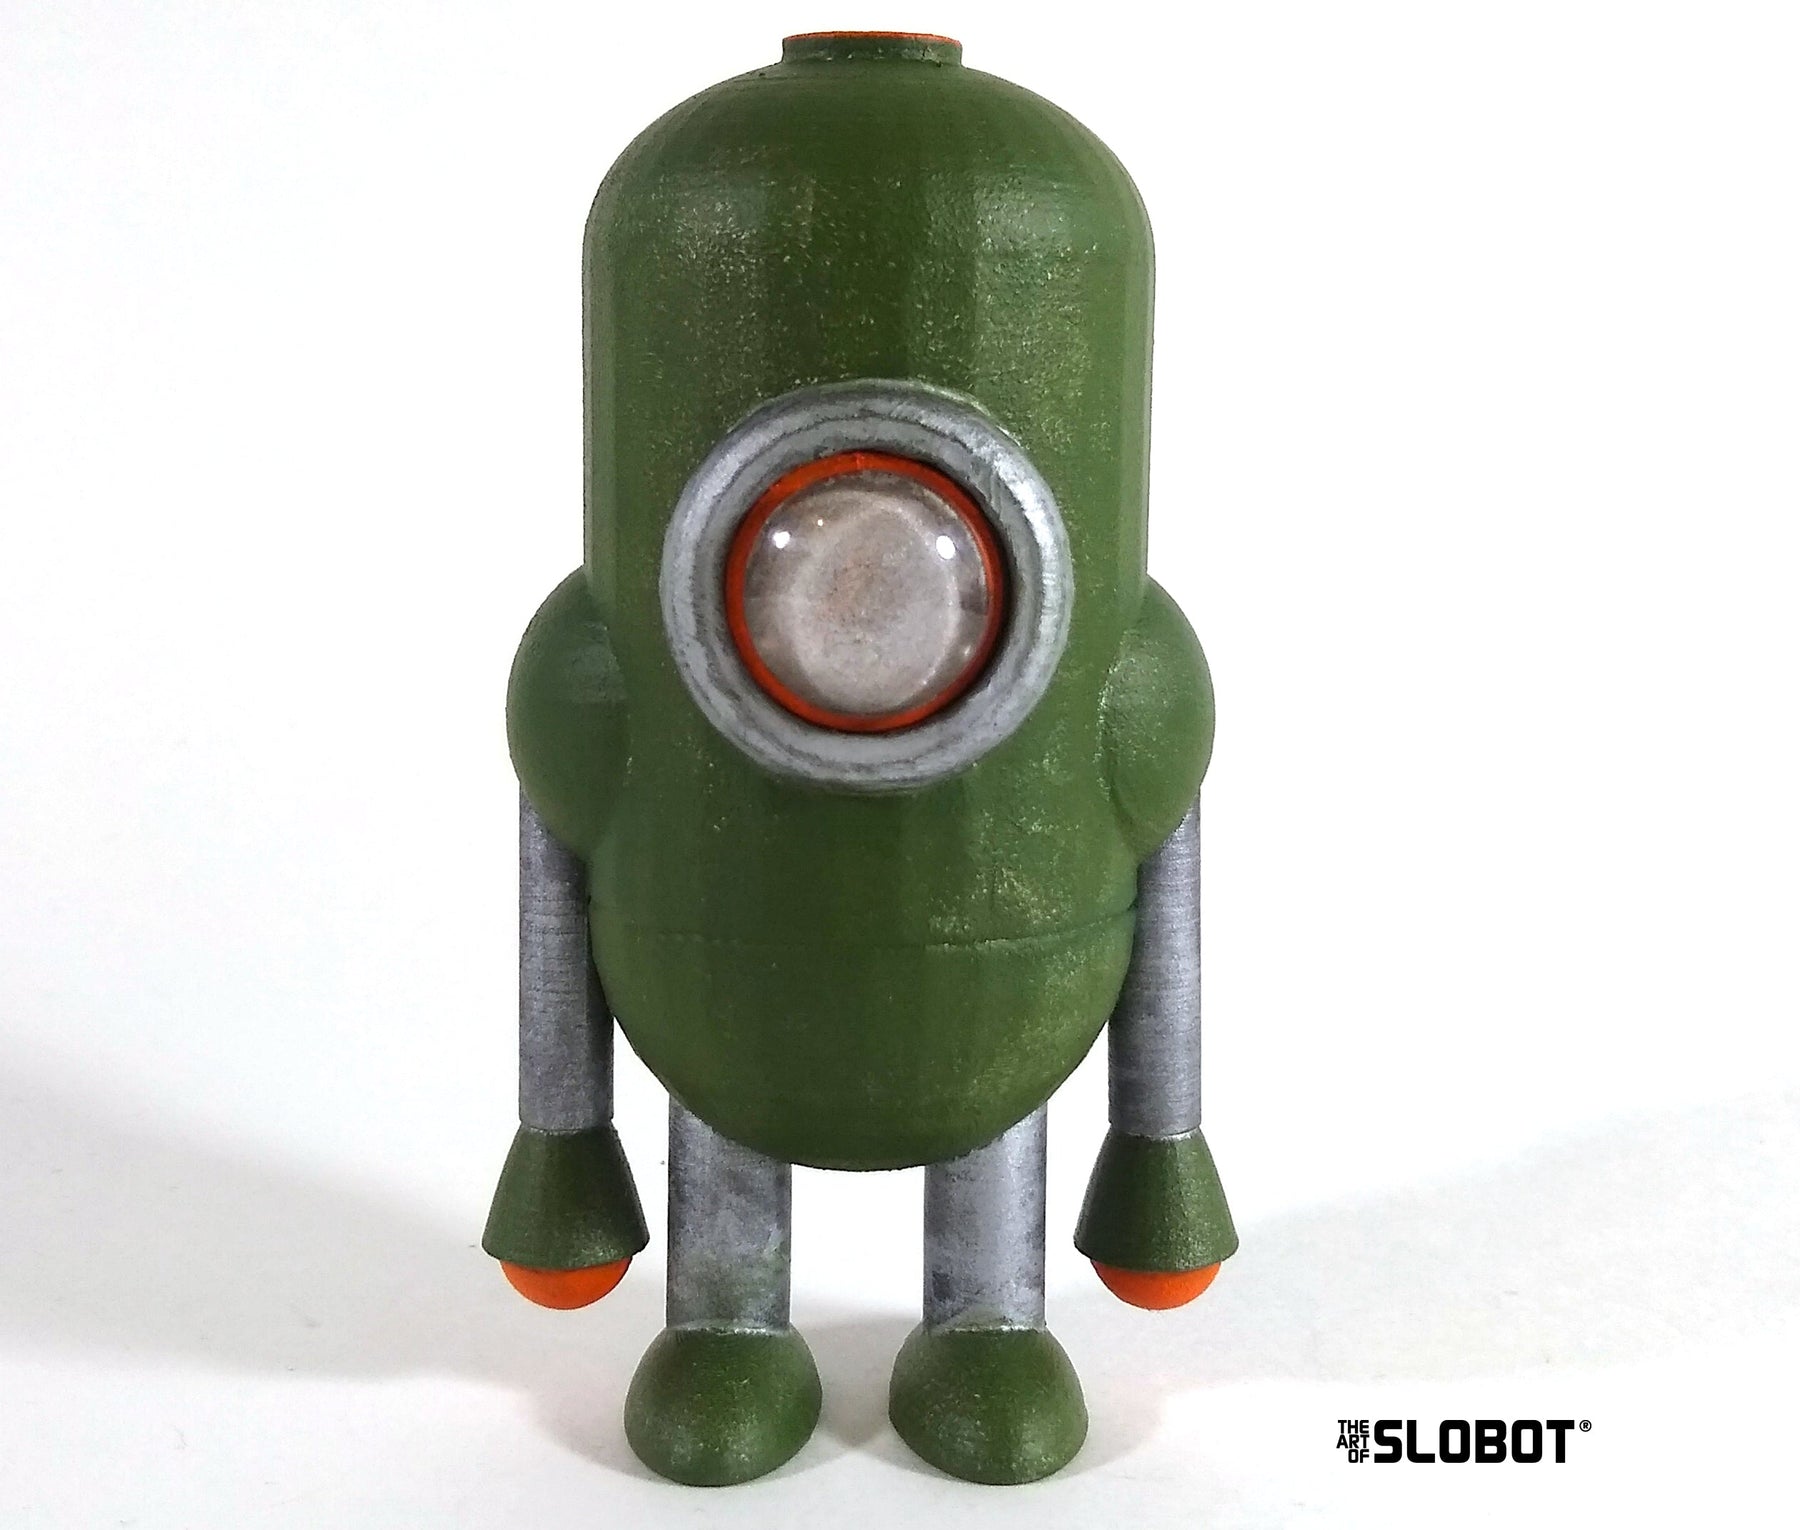 Slobot Carl 5 DB1 4.5" robot figure NYCC Exclusive Available Now ! ! !